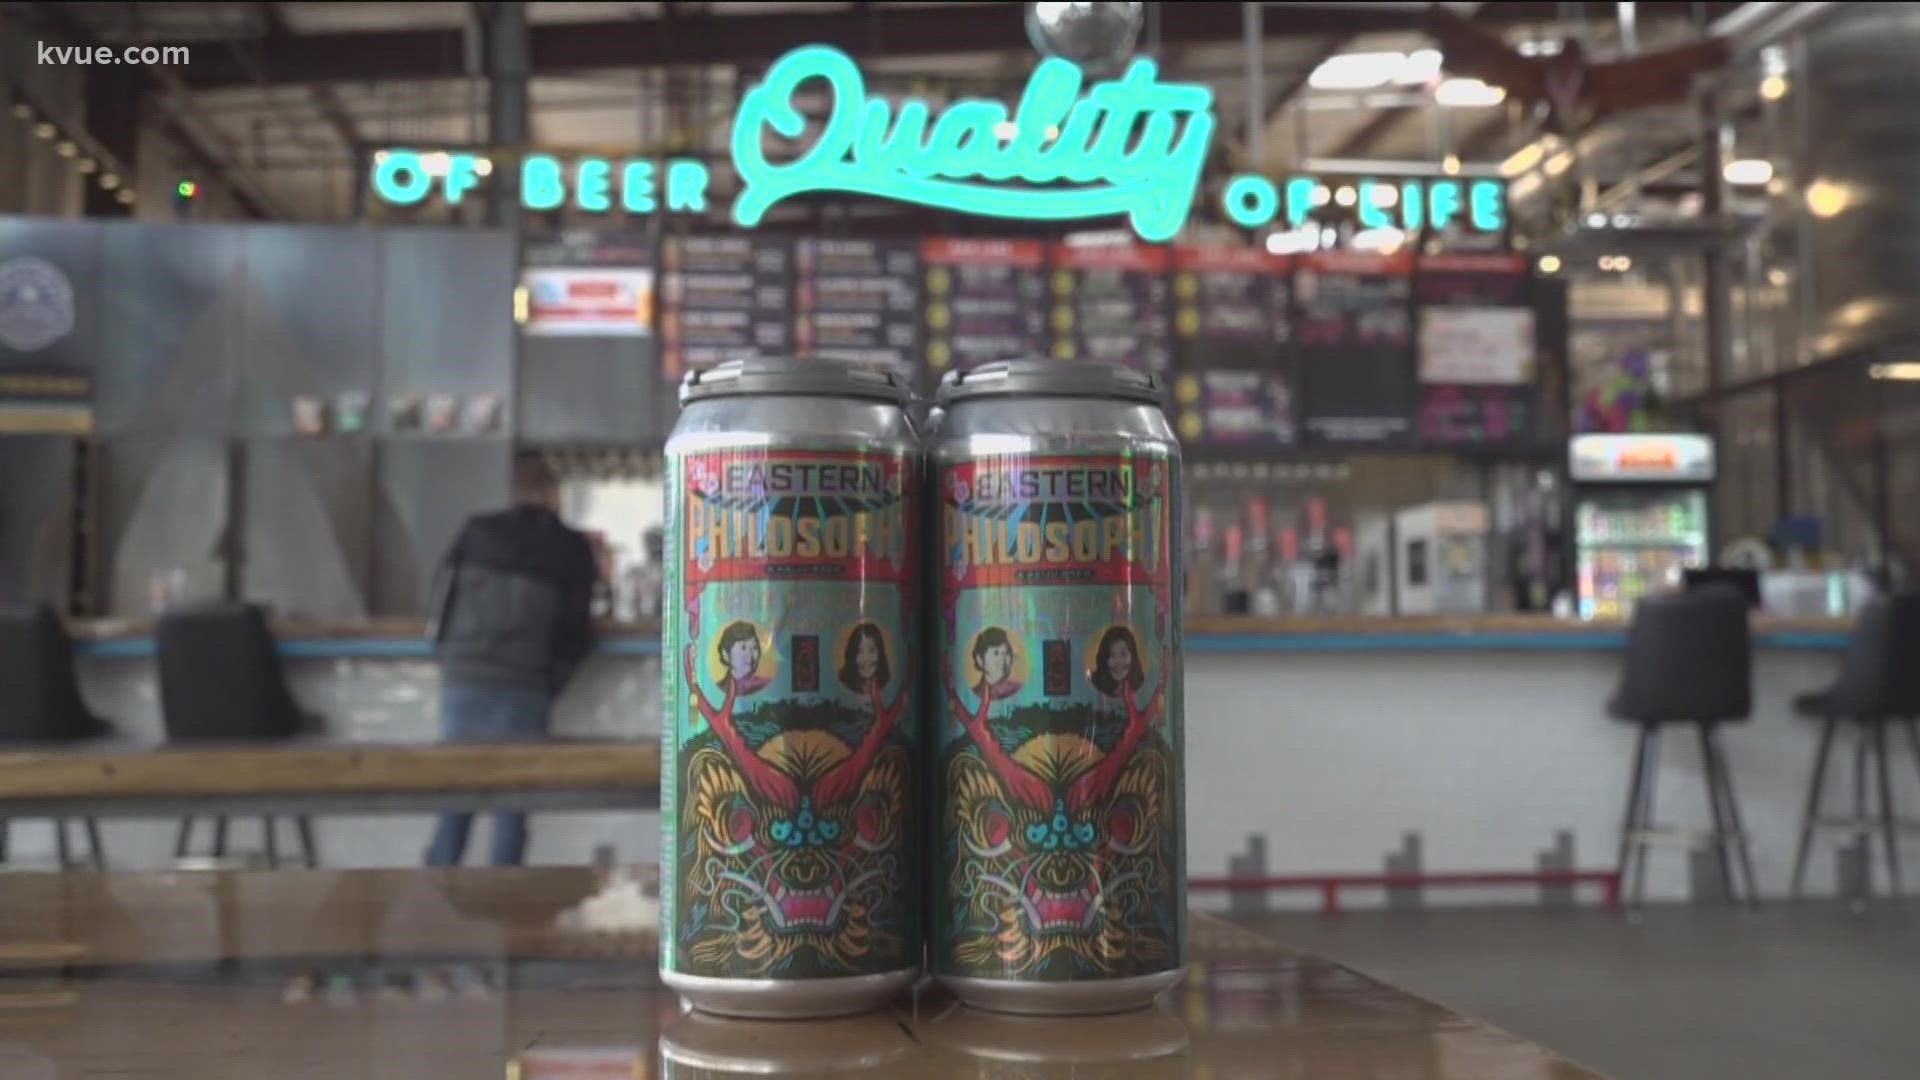 Austin Beerworks and Kaiju Cut + Sew worked together for months to create a jasmine dragon pearl tea-infused lager made that's poured over ice.